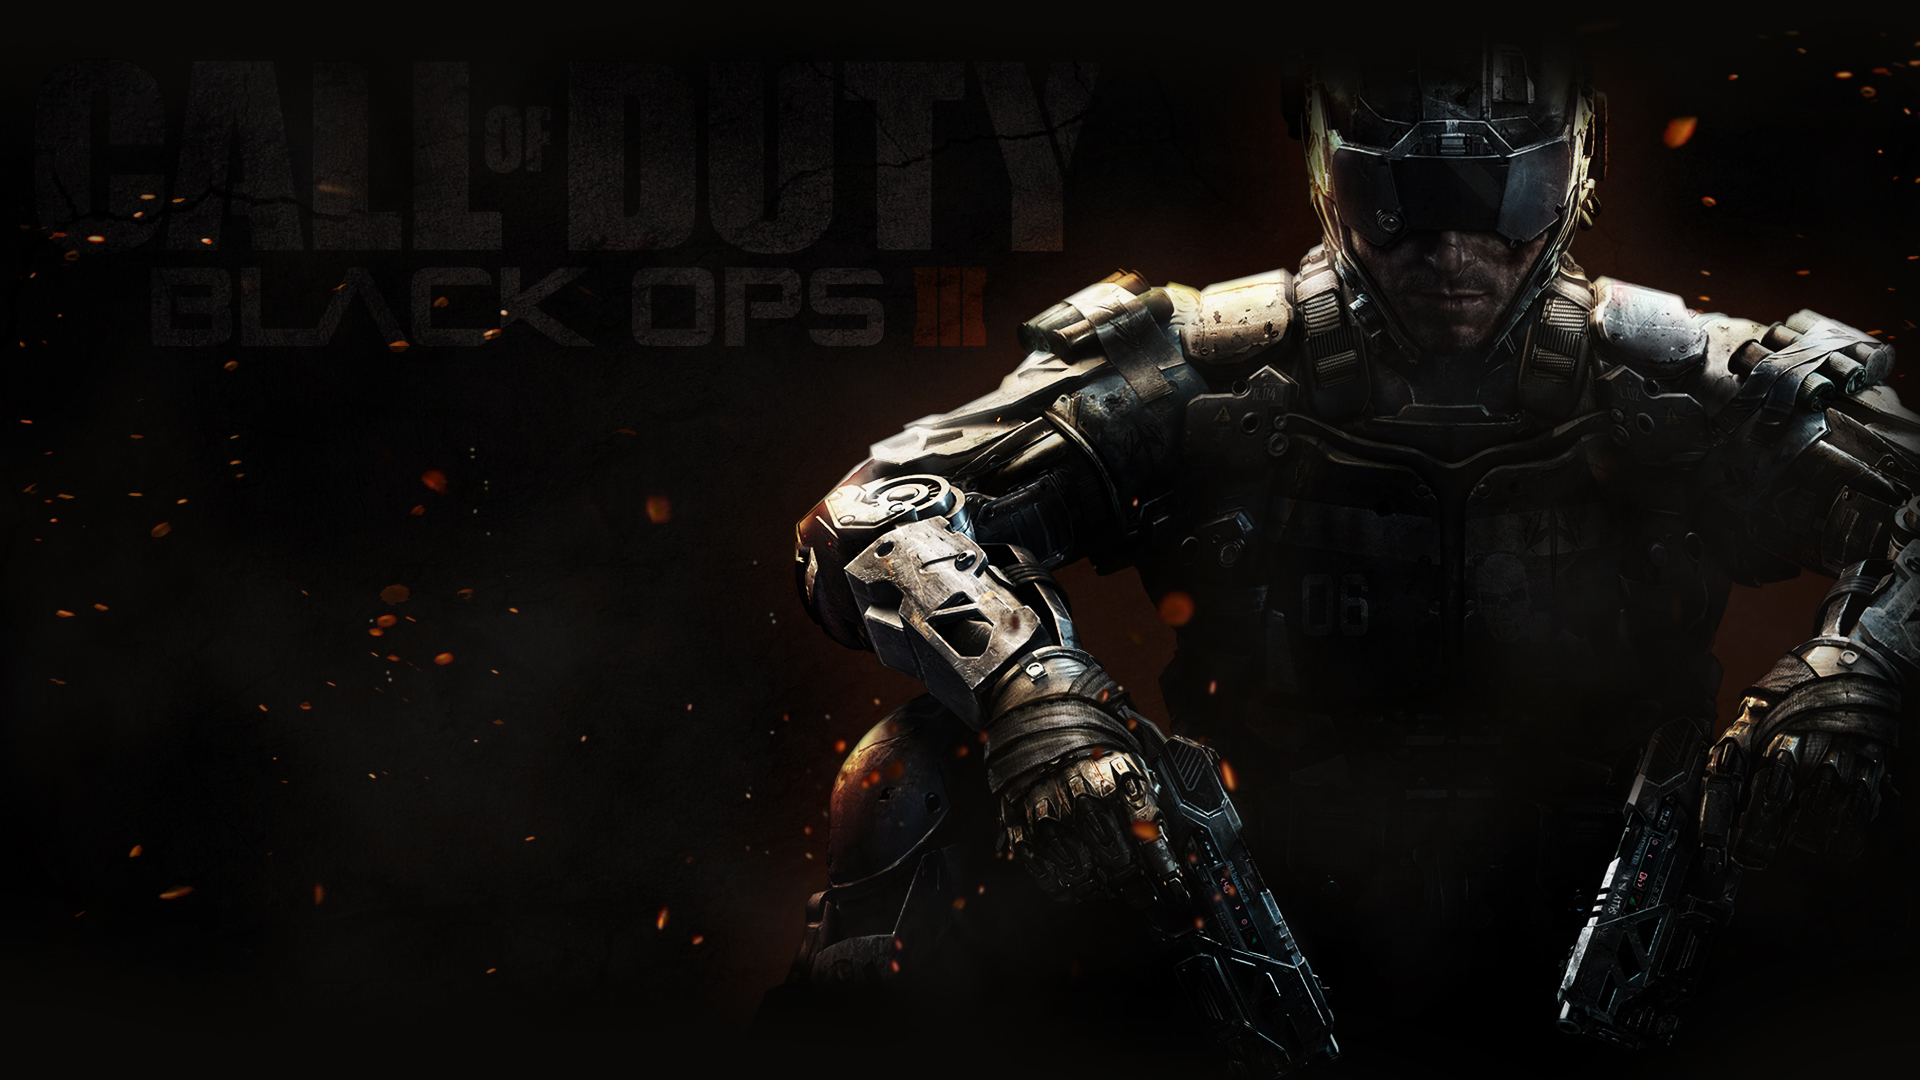 Call of Duty Black Ops 3 Wallpaper 01 by Toby Affenbude on